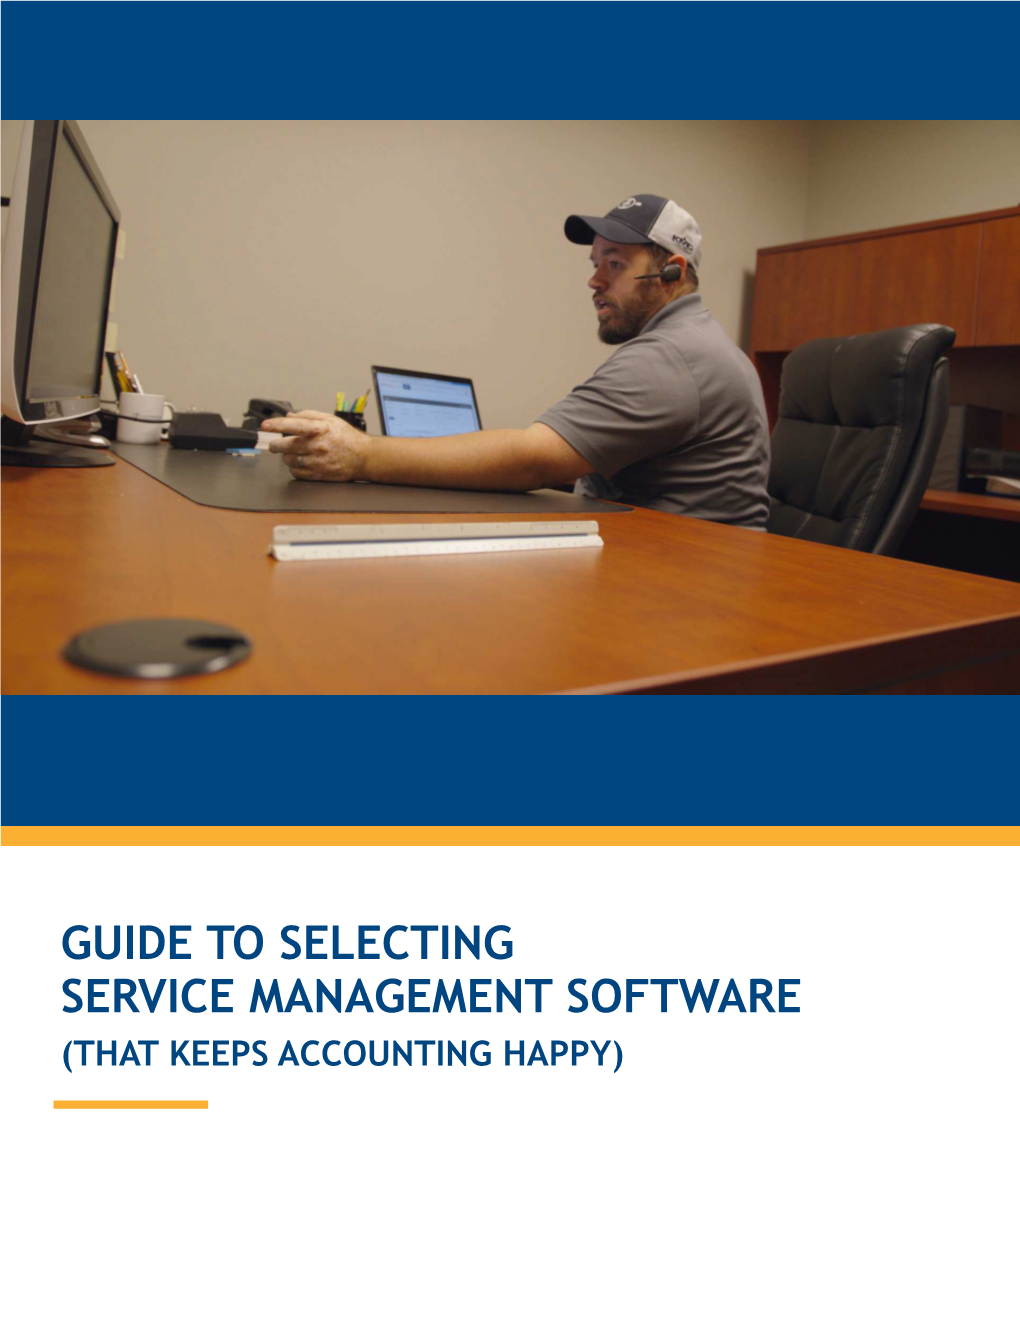 Guide to Selecting Service Management Software That Keeps